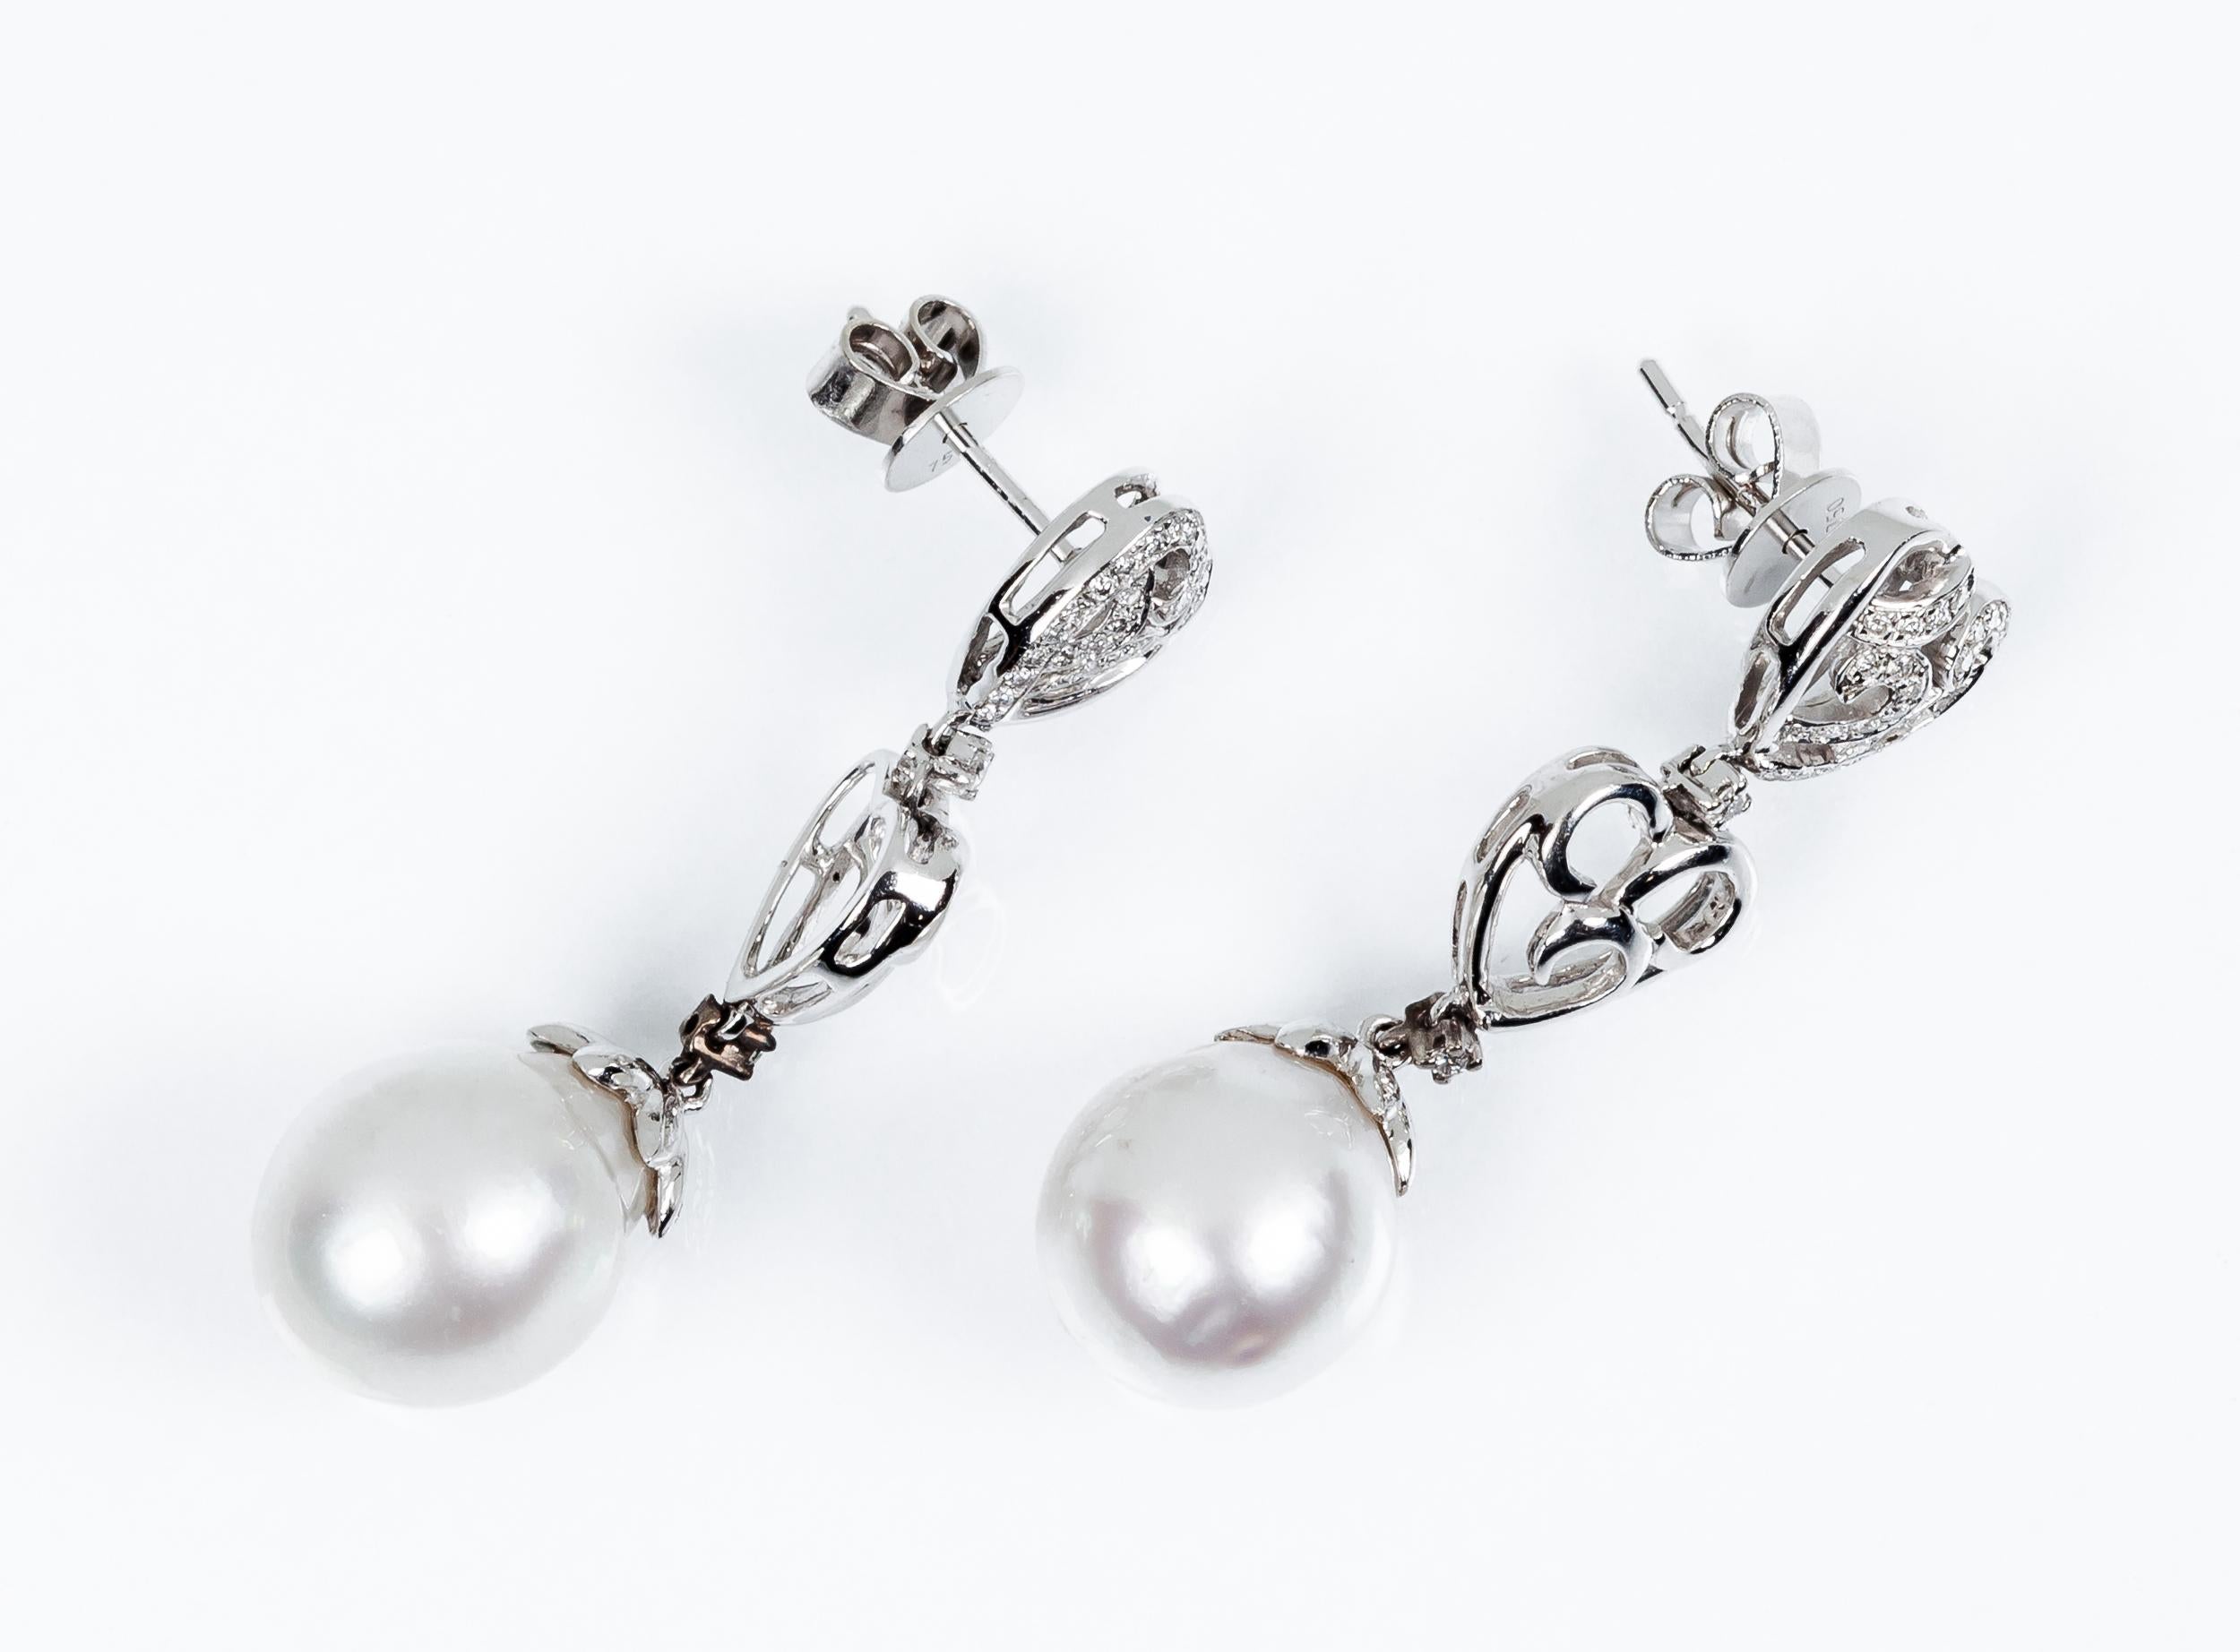 Bridal Australian Pearl 18k White Gold and Pavé Diamond Earrings
PRADERA BRIDAL Collection 
White Australian Pearl 12mm
Length of earrings 40mm
Diamonds 60  aprox 0,30ct  Color H and Clarity VS

Irama Pradera is a Young designer from Spain that